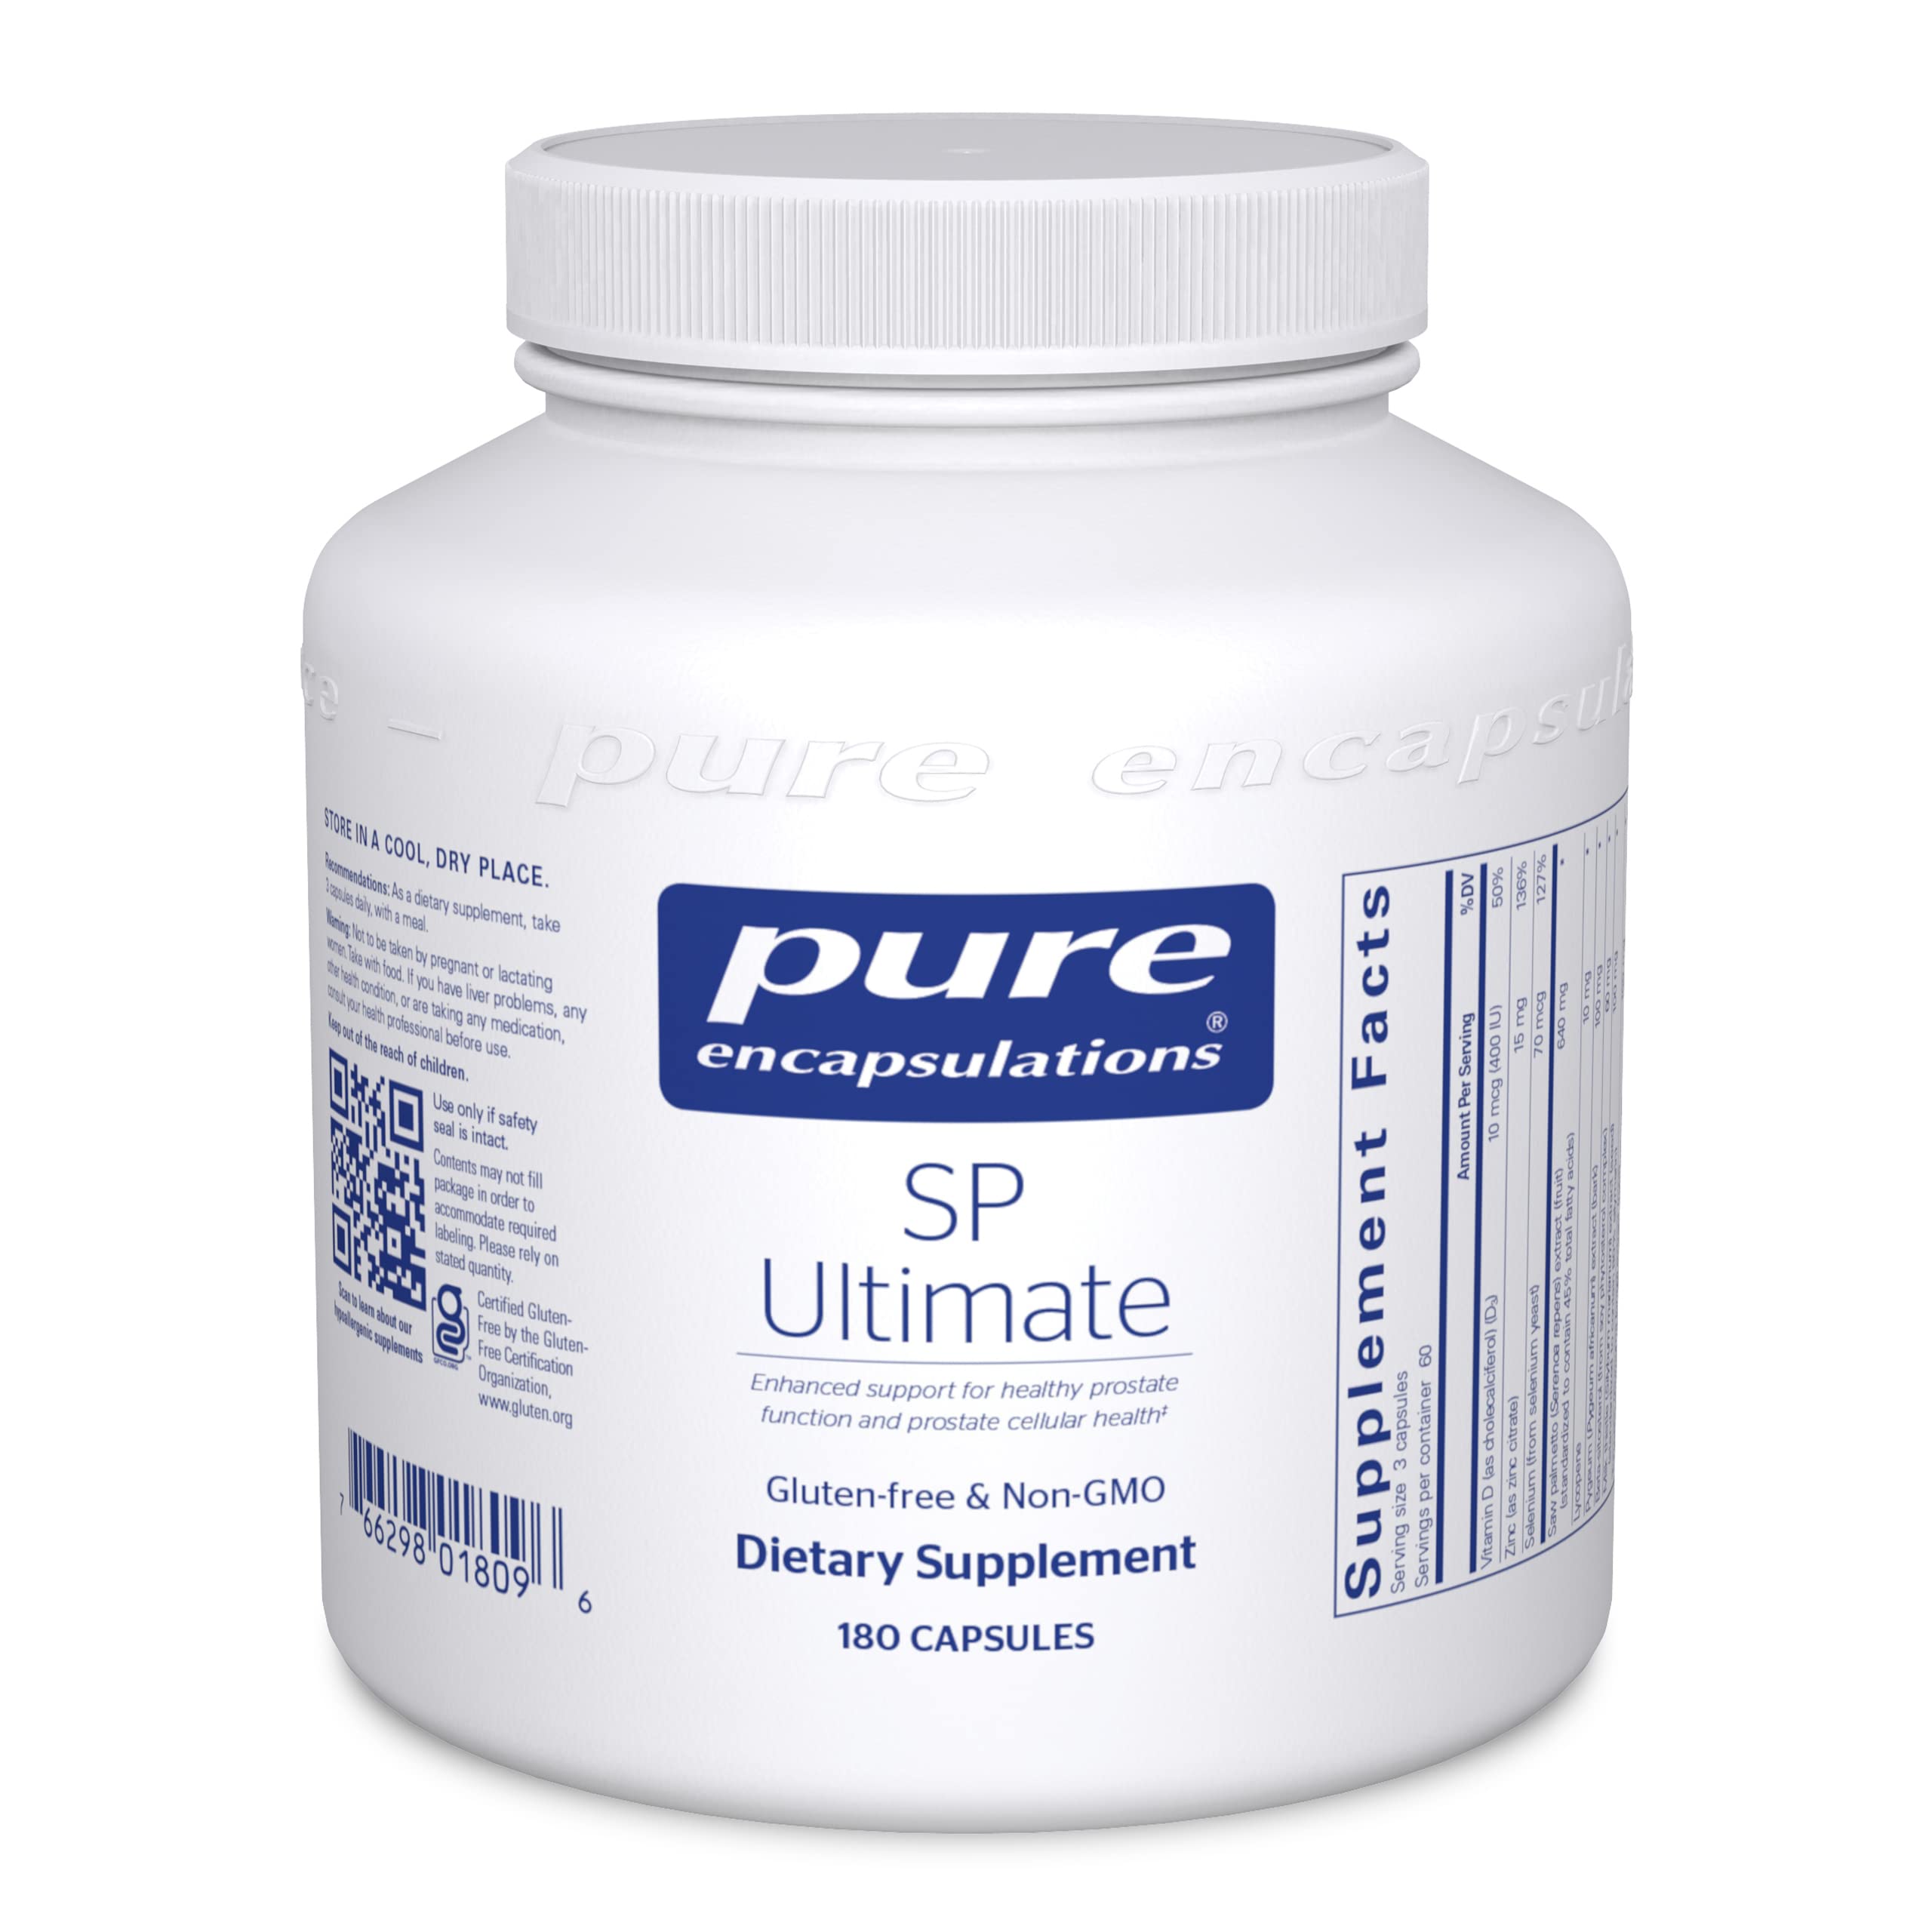 Pure Encapsulations - SP Ultimate - Enhance Support for Healthy Prostate Function and Prostate Cellular Health* - 180 Capsules